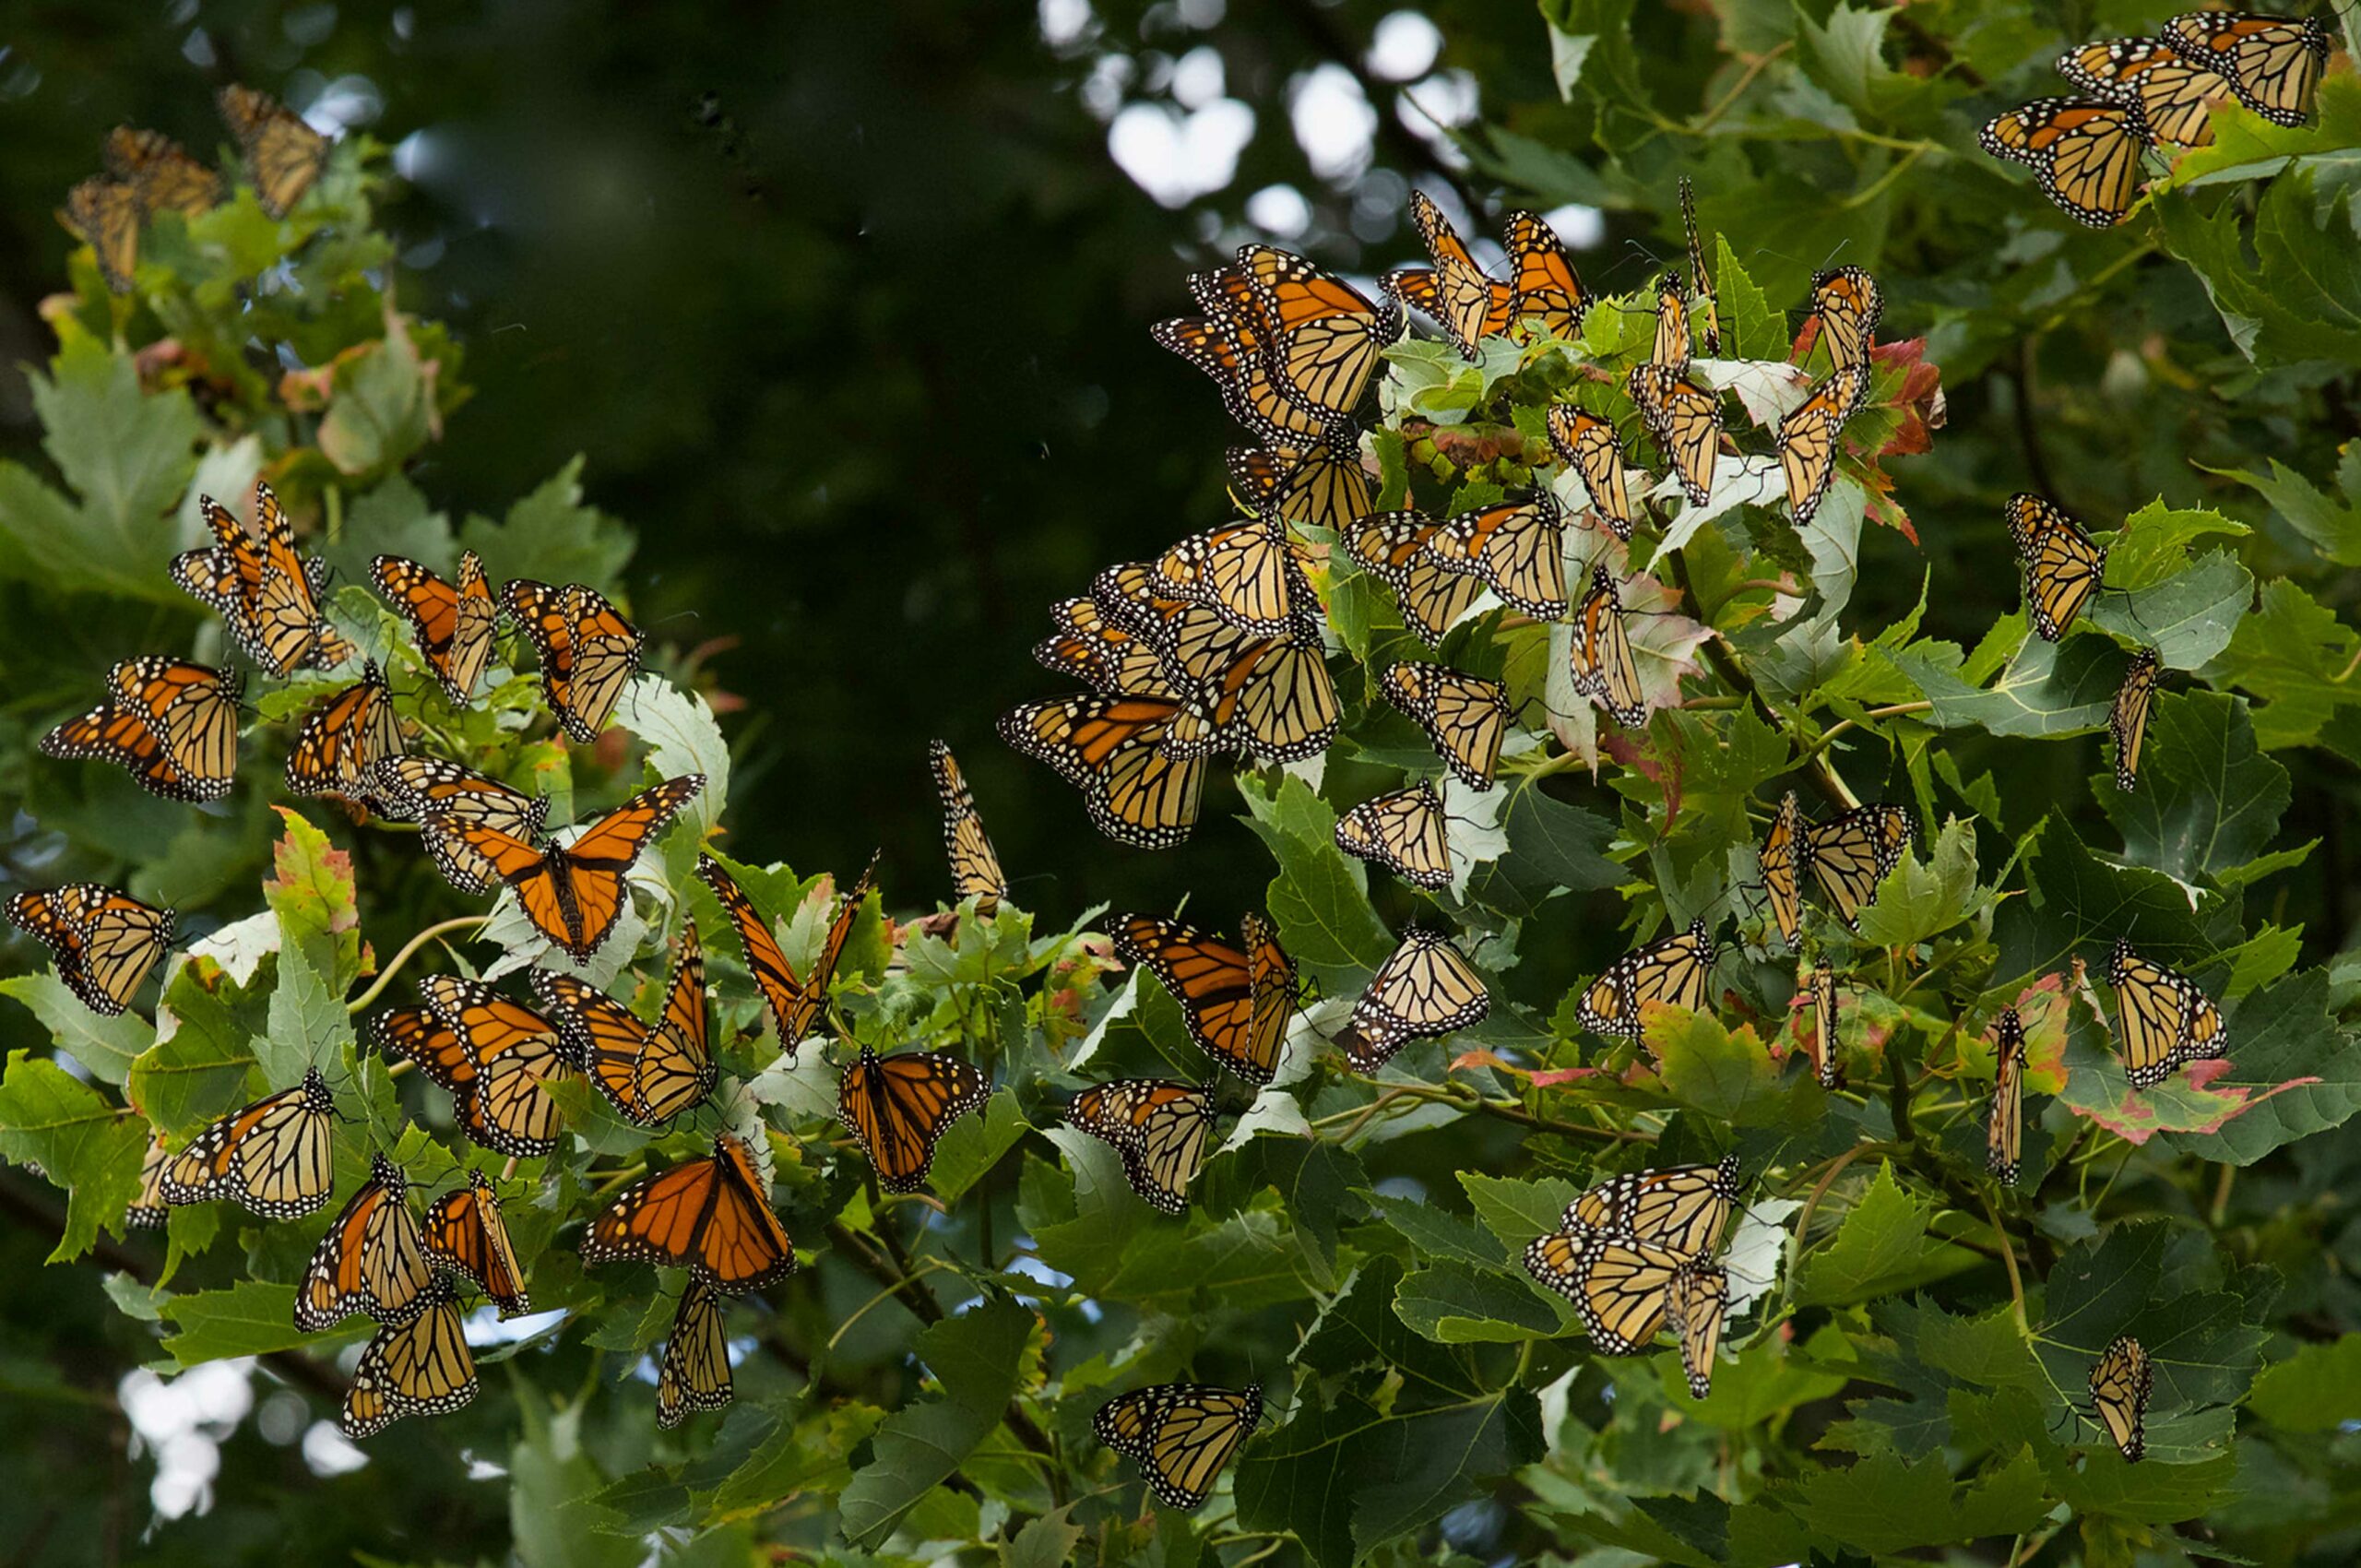 a monarch roost resting together on a tree branch of leaves goes to communications and outreach working group page when clicked on